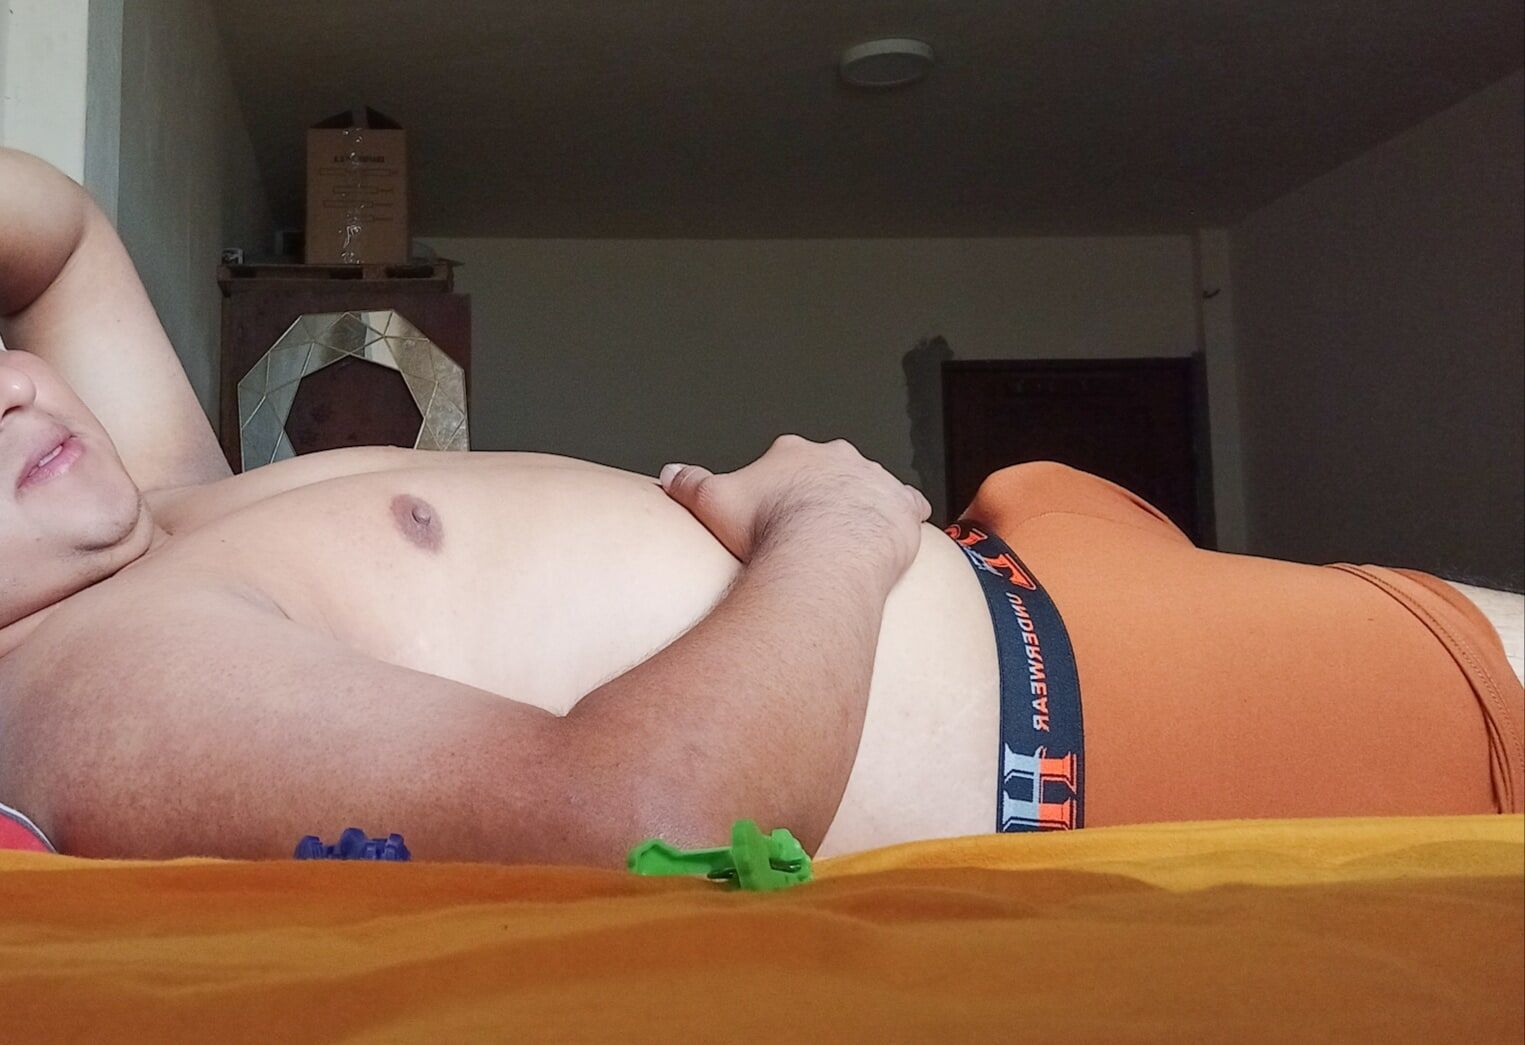 Me Lying Down and my Penis Standing - 01 (In Underwear) #3